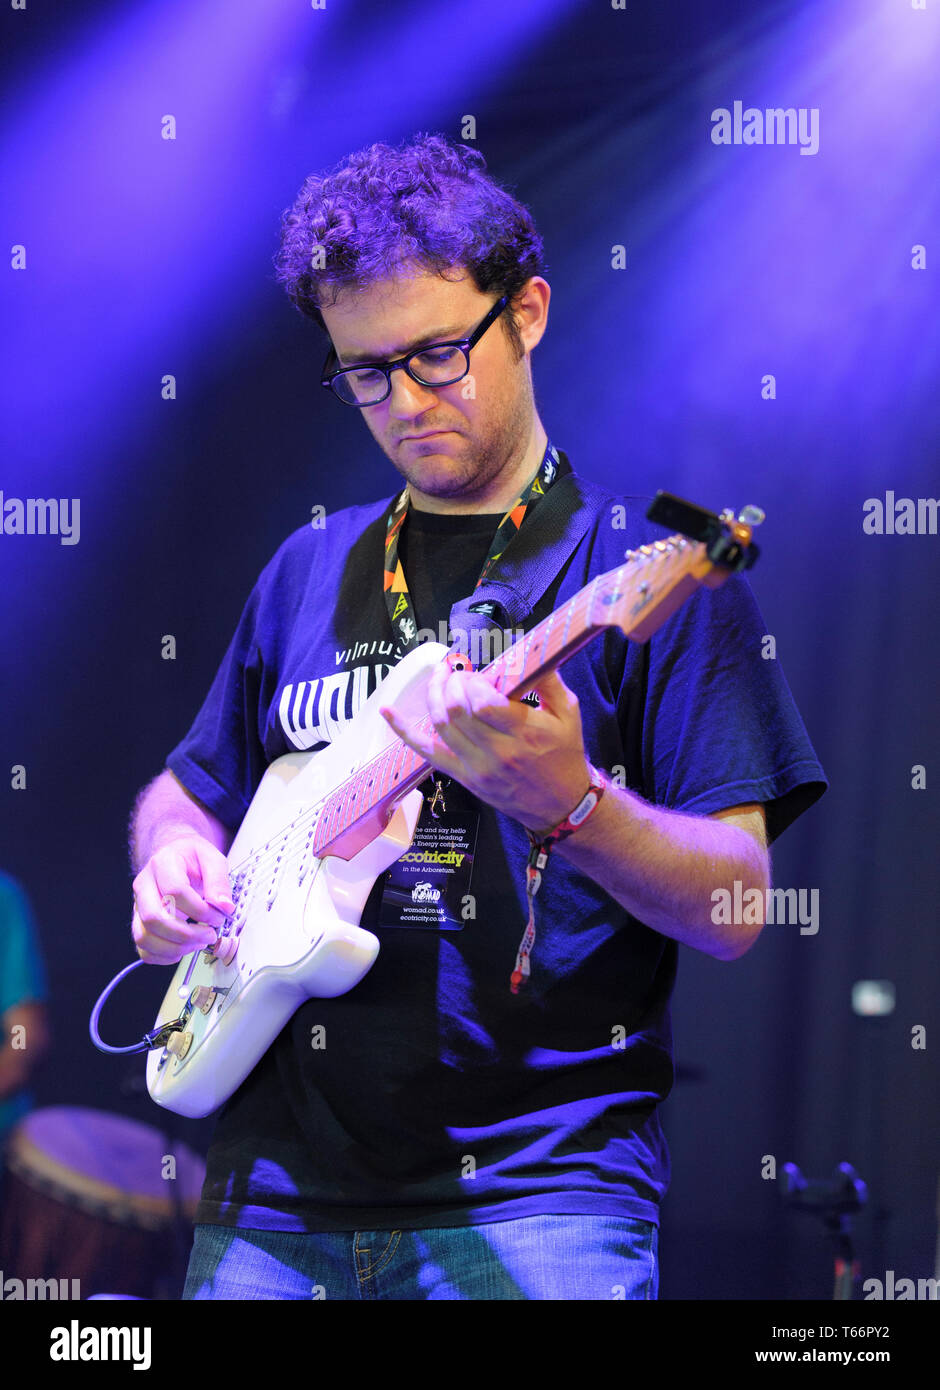 Chris mcqueen snarky puppy hi-res stock photography and images - Alamy